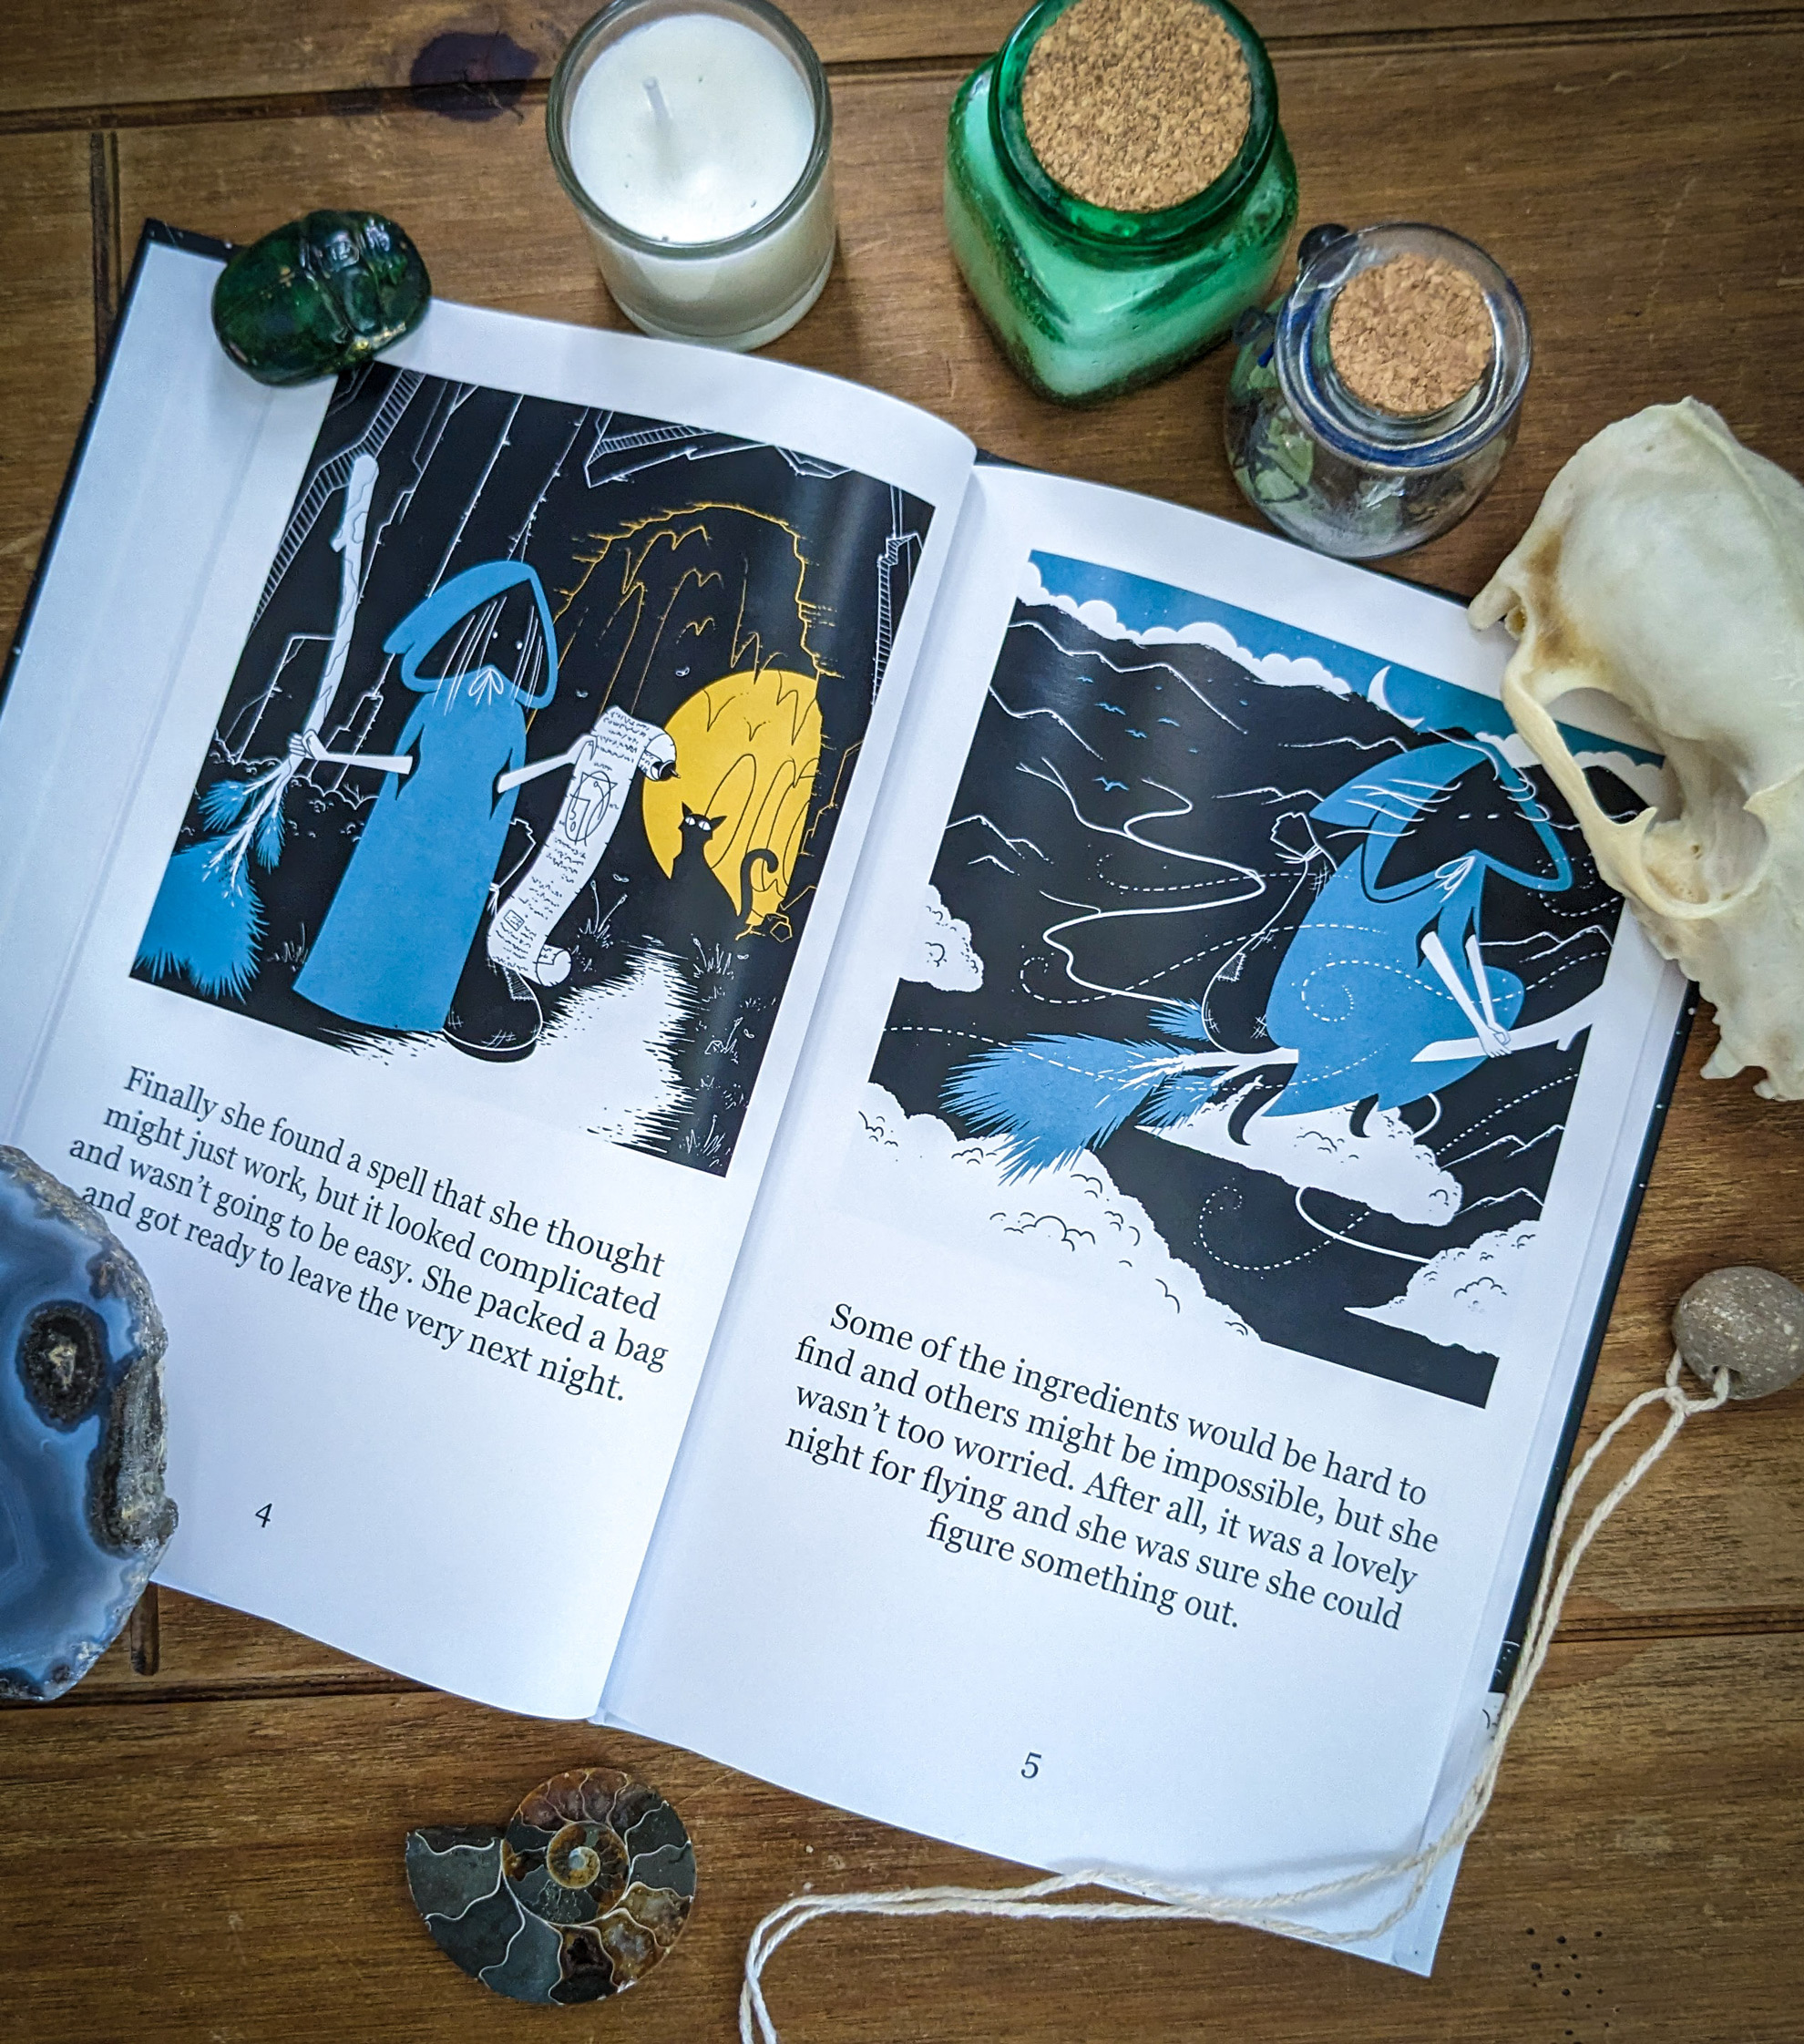 The Spell - A Children's Book by Justin Doak